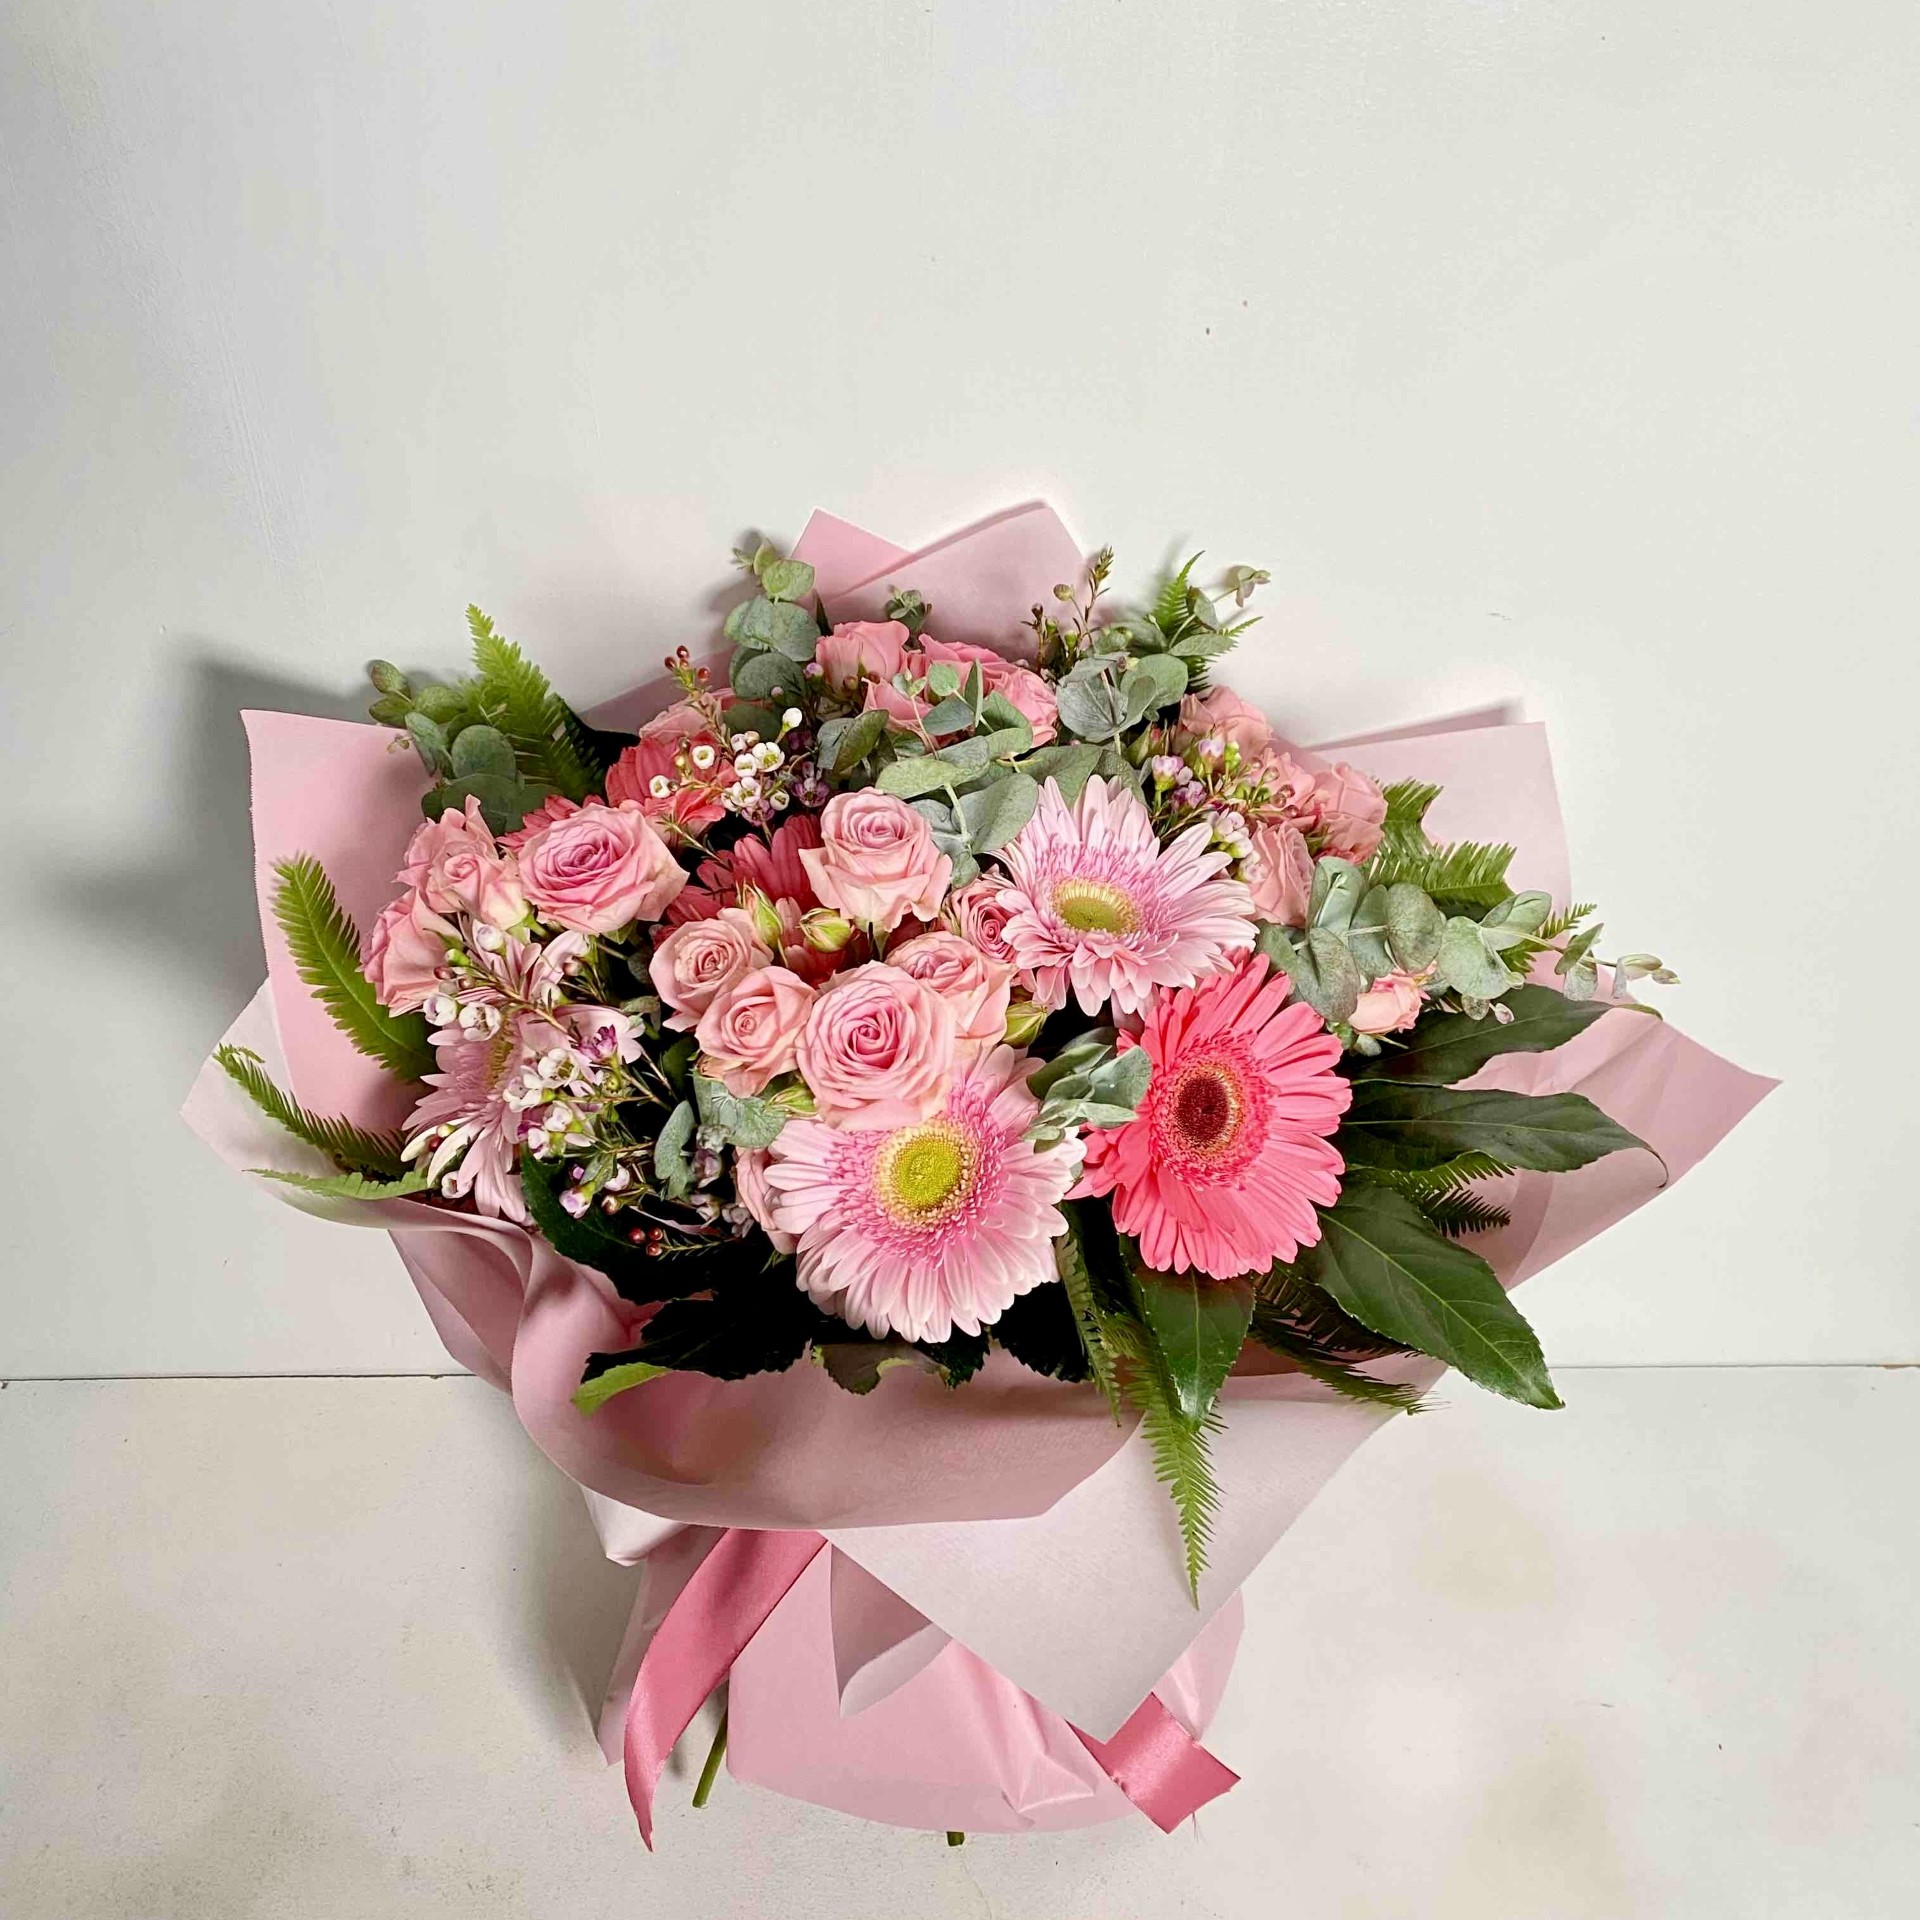 PINK COMBINATION OF FLOWERS ZERBERES MINI ROSES AND DIFFERENT GREENERIES